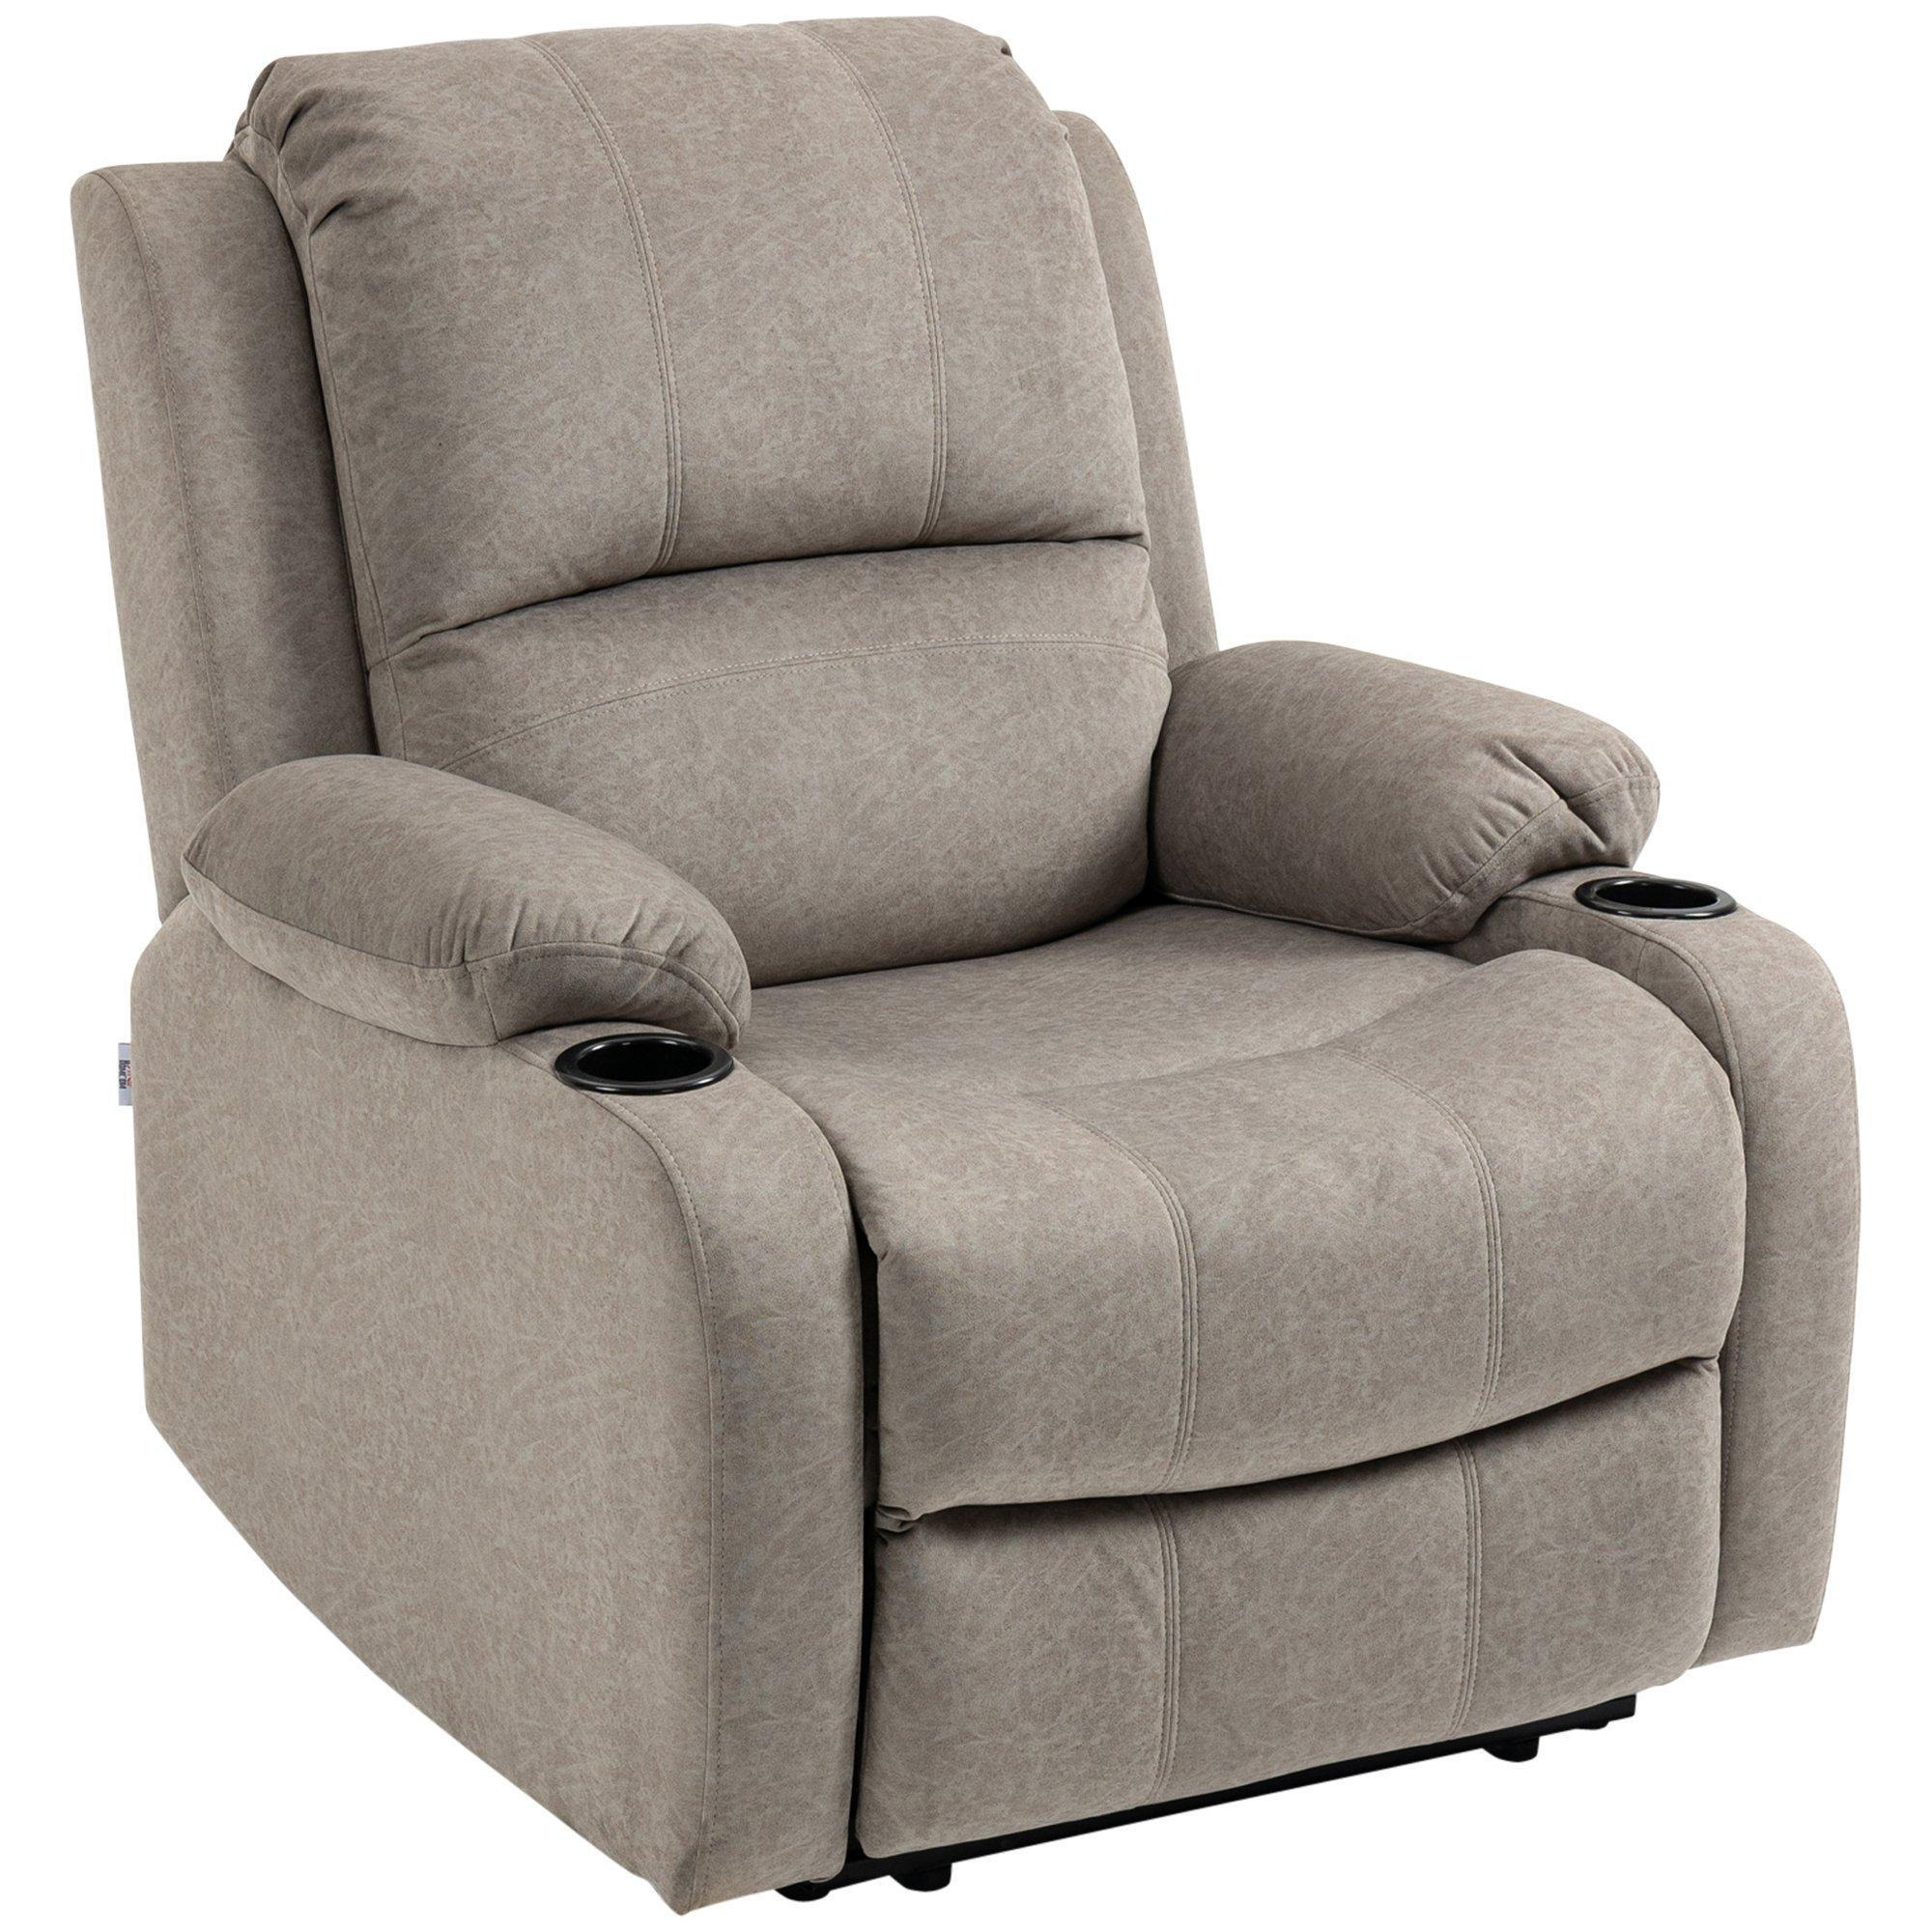 Recliner Chairs for Living Room, Microfibre Cloth Reclining Armchair - image 1